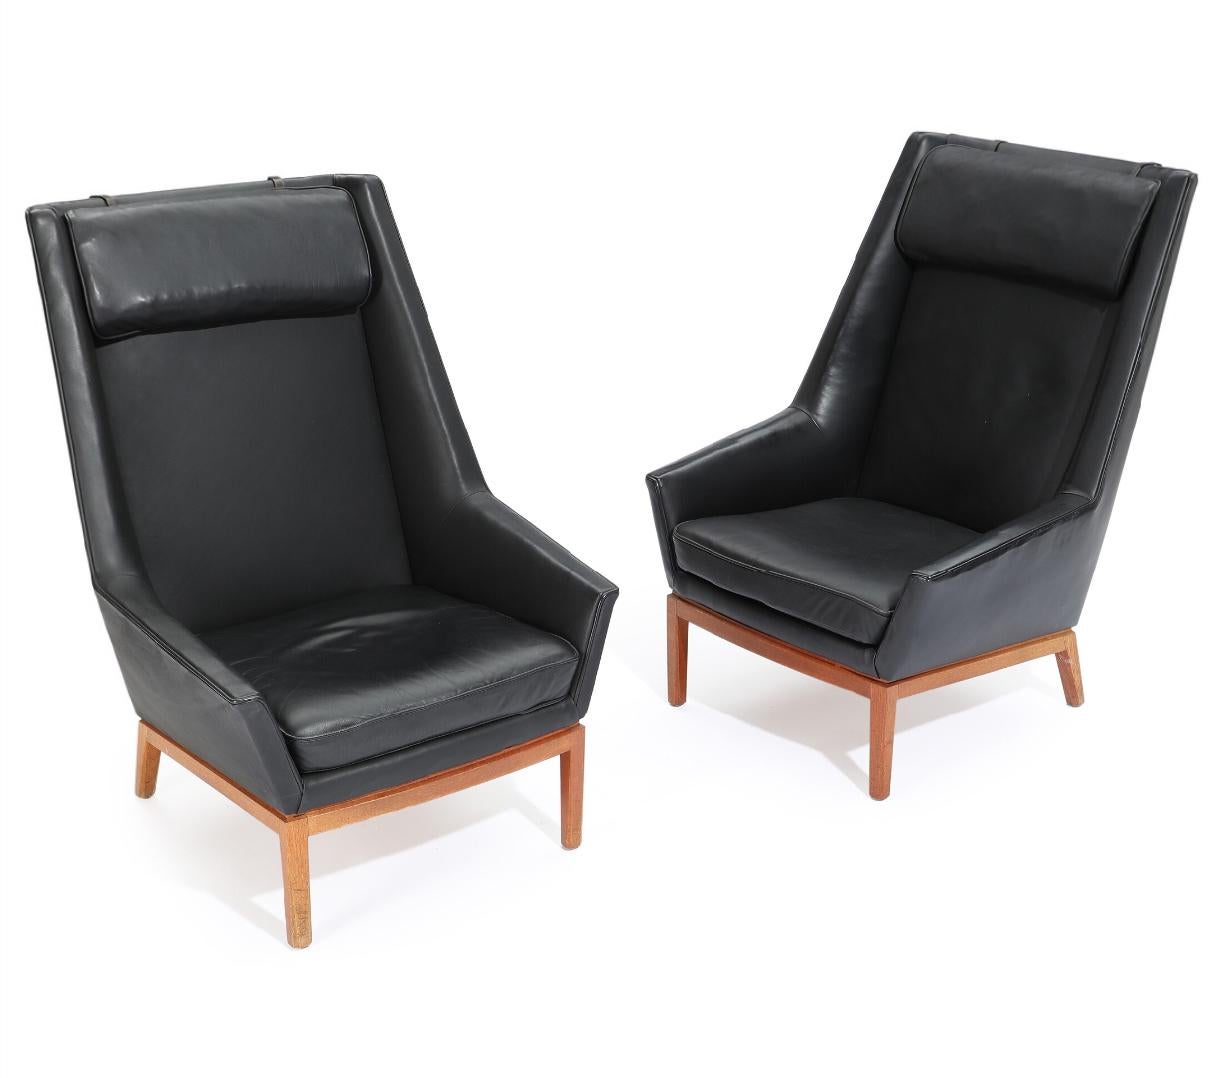 Erik Kolling Andersen (b. 1921)
Danish highback easy chairs with teak frame. Sides, back and loose seat cushion upholstered with black leather. Designed 1954. Made by cabinetmaker Peder Pedersen, with maker's label.
Provenance: Director Christian